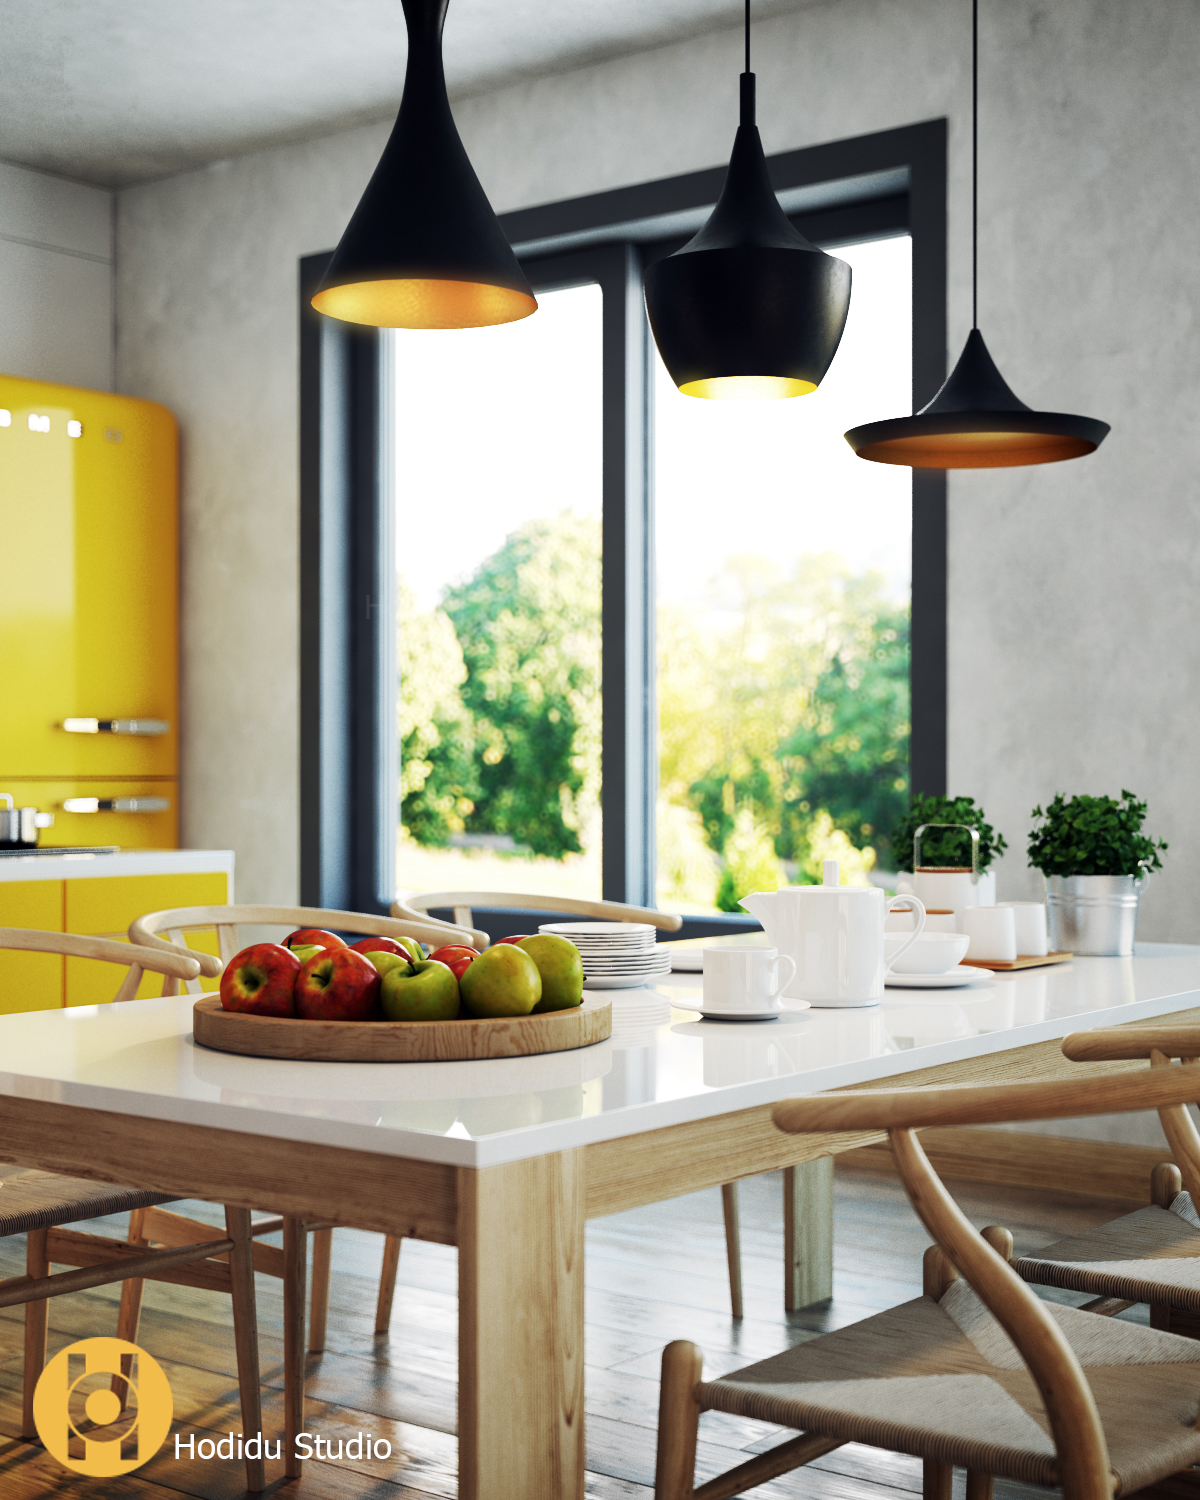 A floor to ceiling window brings light in and black lamps have sunny yellow inner sides to keep the color scheme